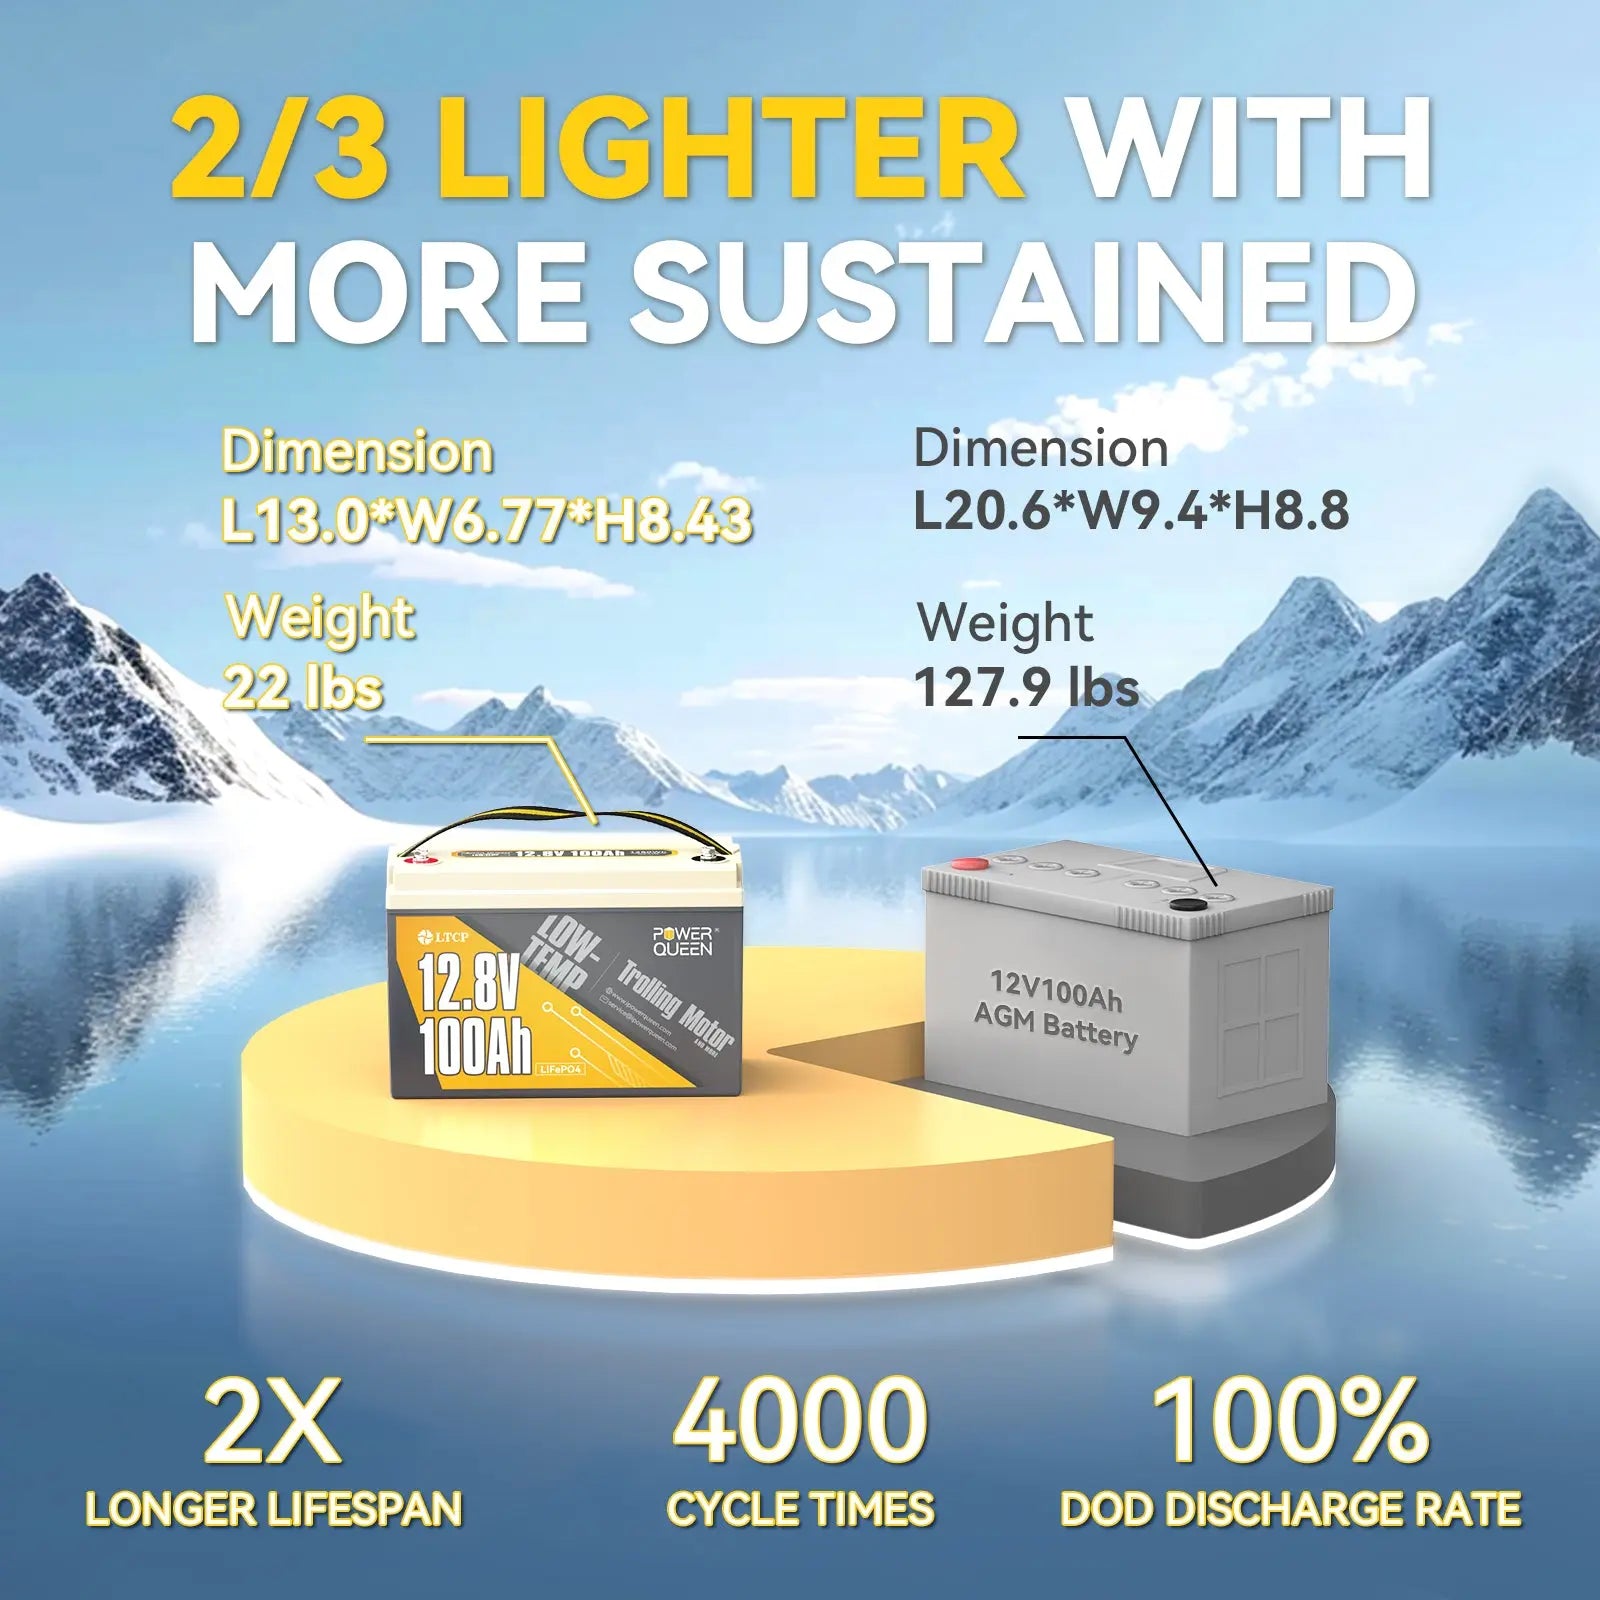 12.8V 100Ah lithium battery vs 12V 100Ah AGM battery: lighter with more sustained